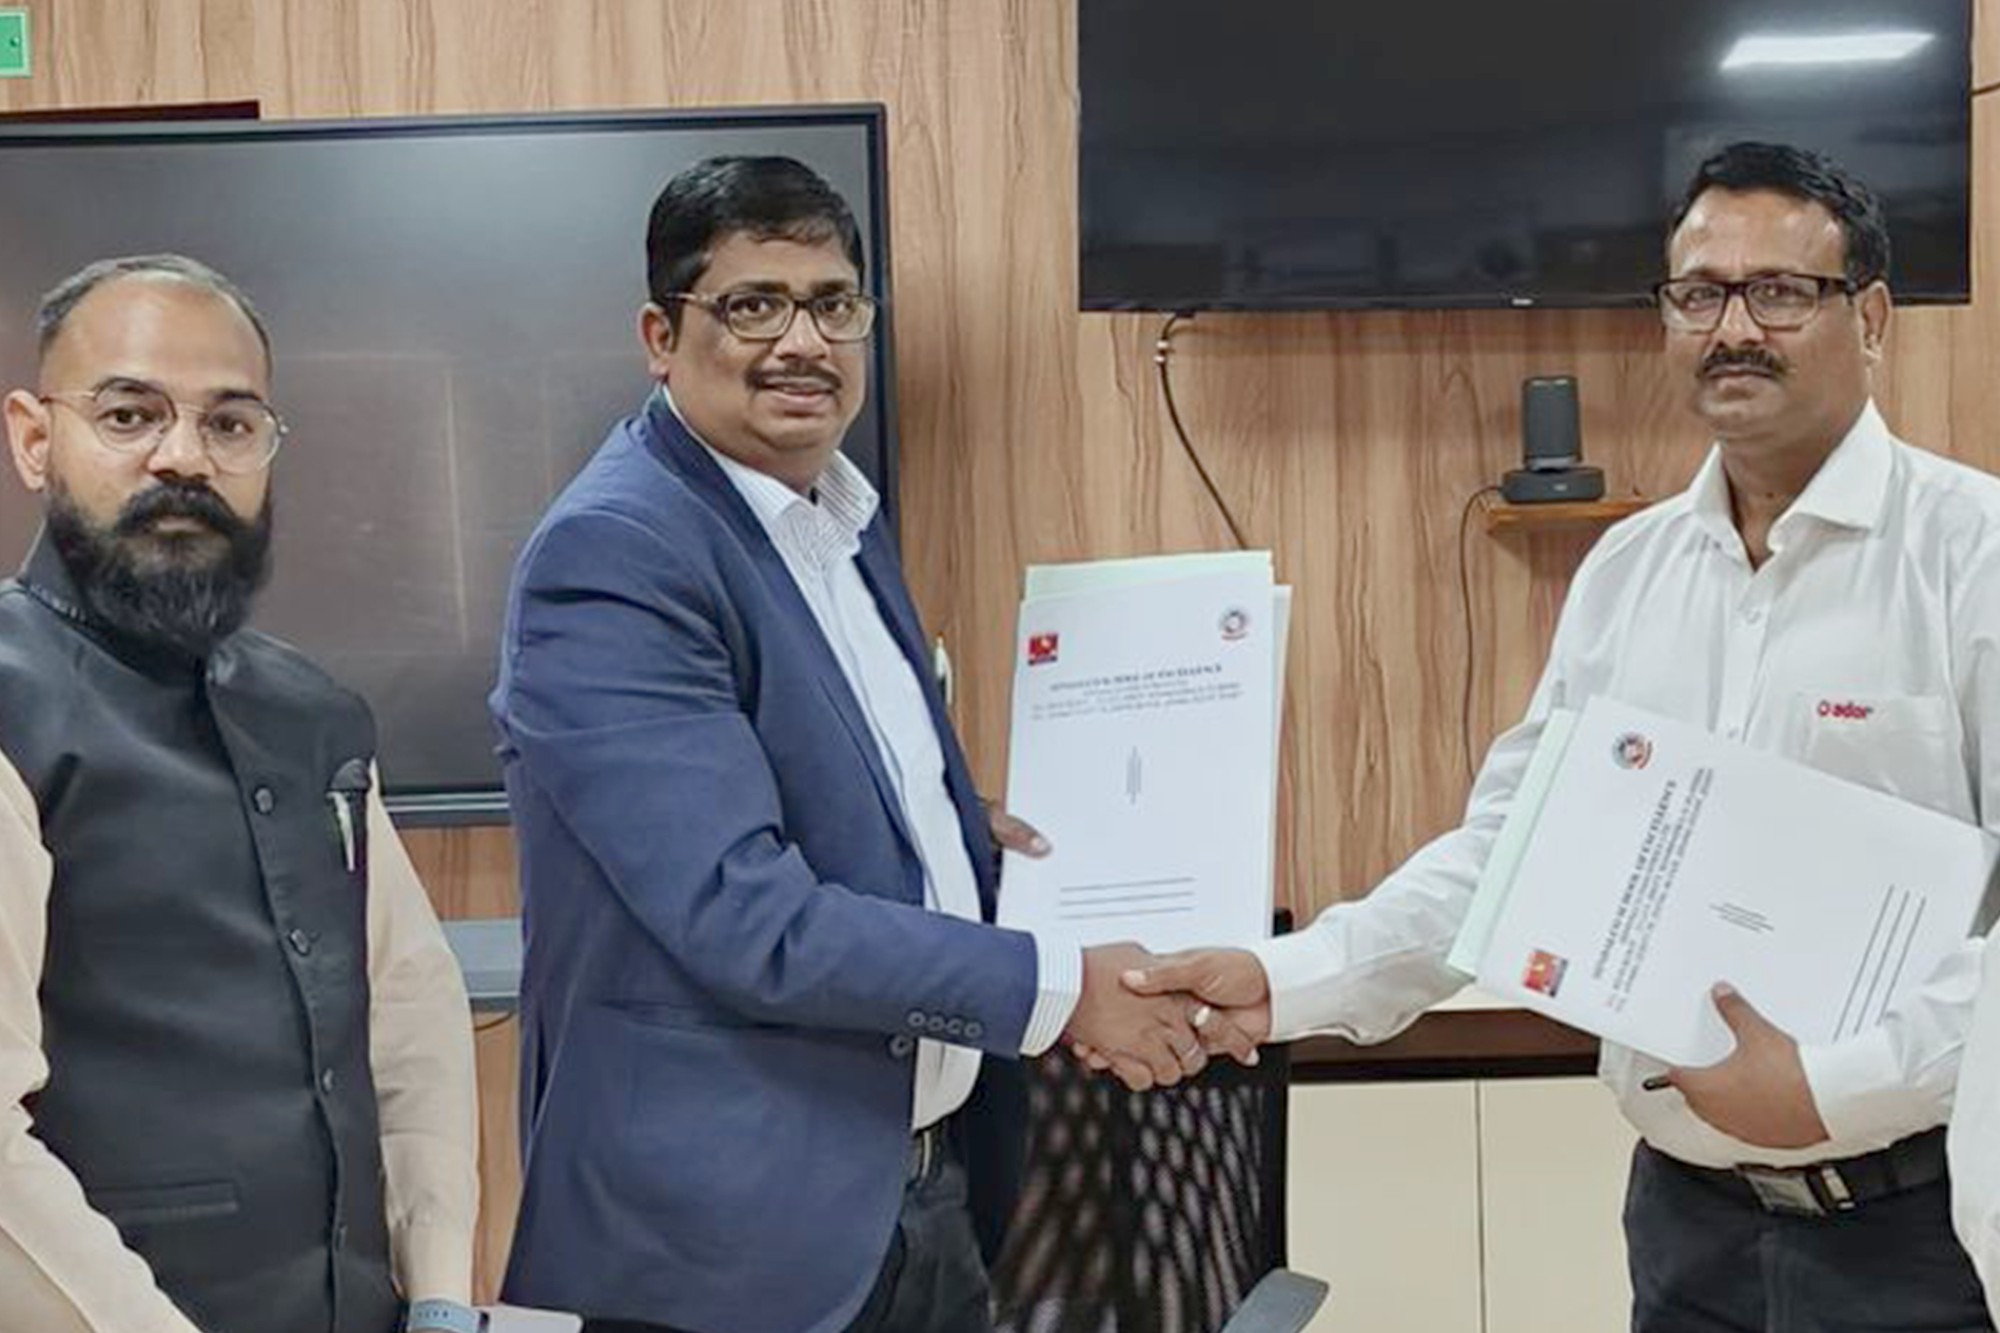 Ador Welding partners with Hindalco to enhance the advance welding skills of Hindalco employees